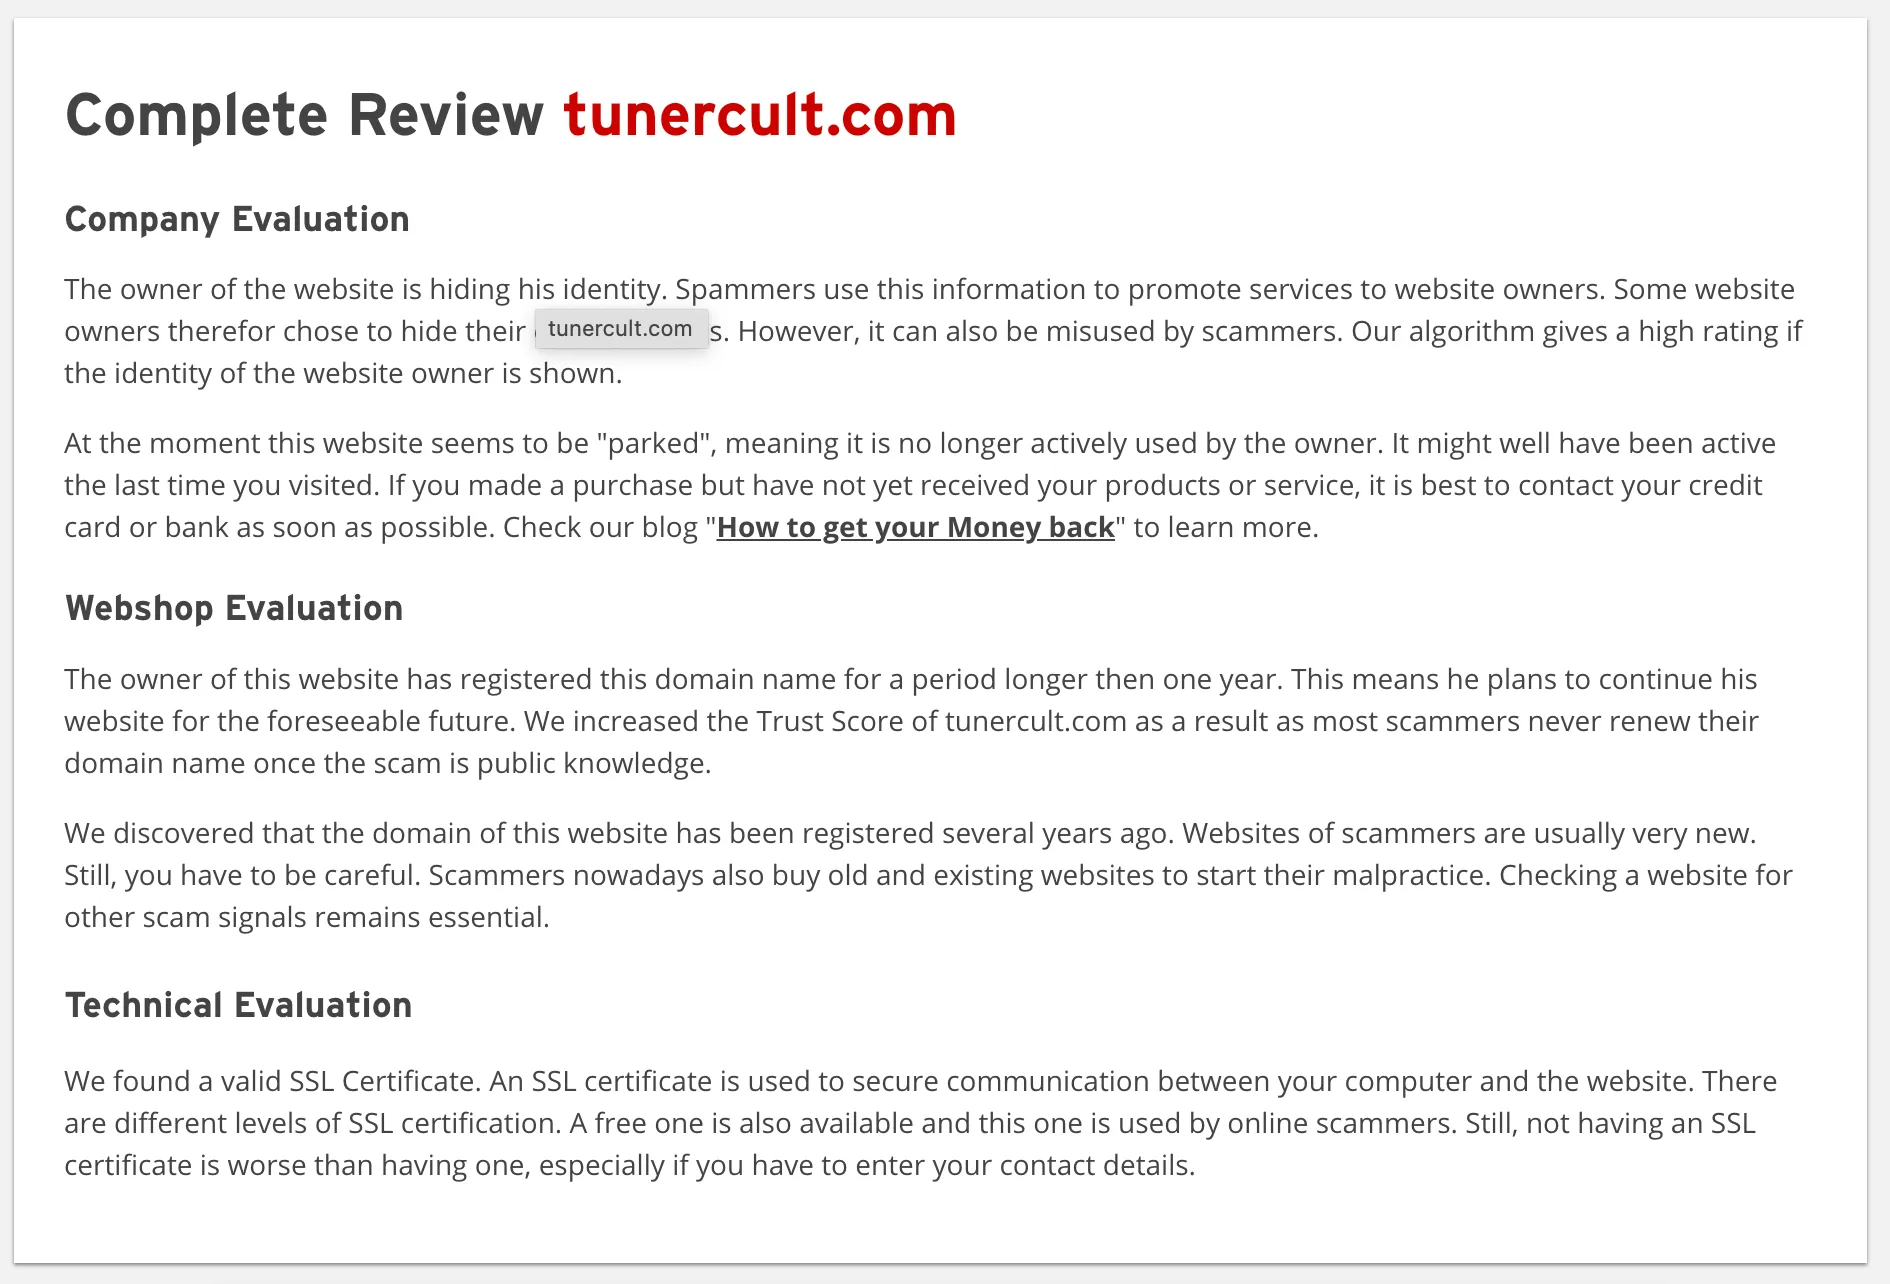 TunerCult Review